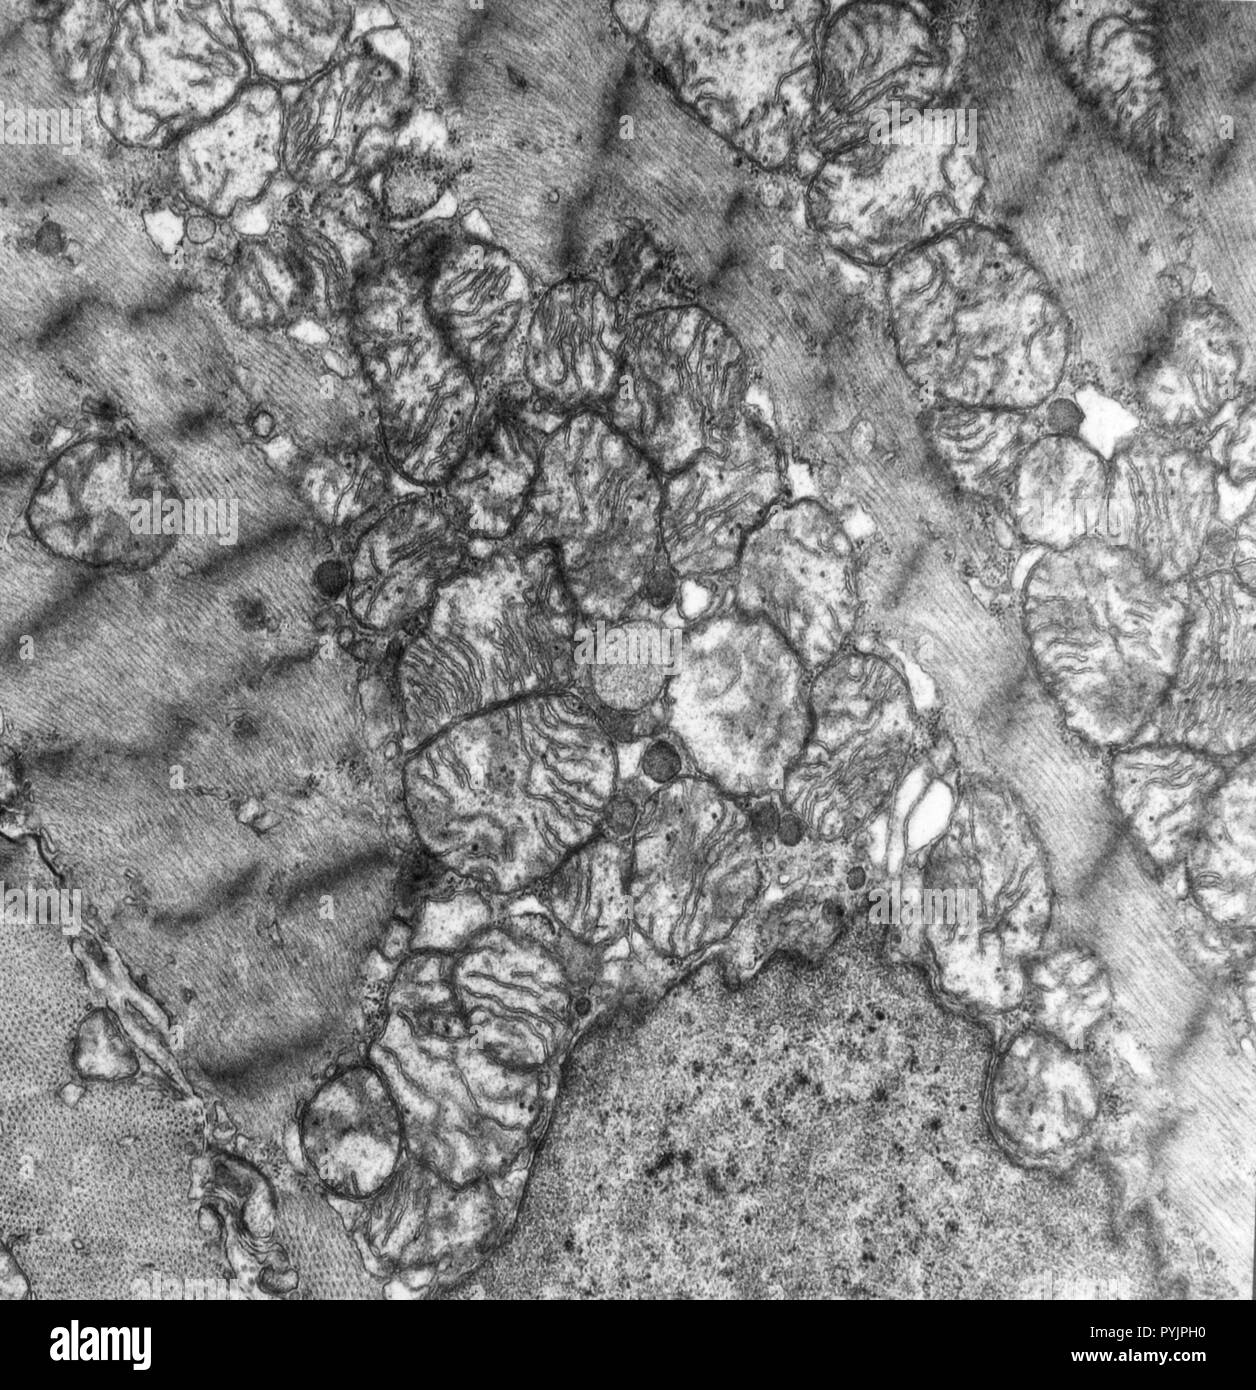 Electron micrograph of a cross section of mitochondria in cardiac muscle tissue Stock Photo